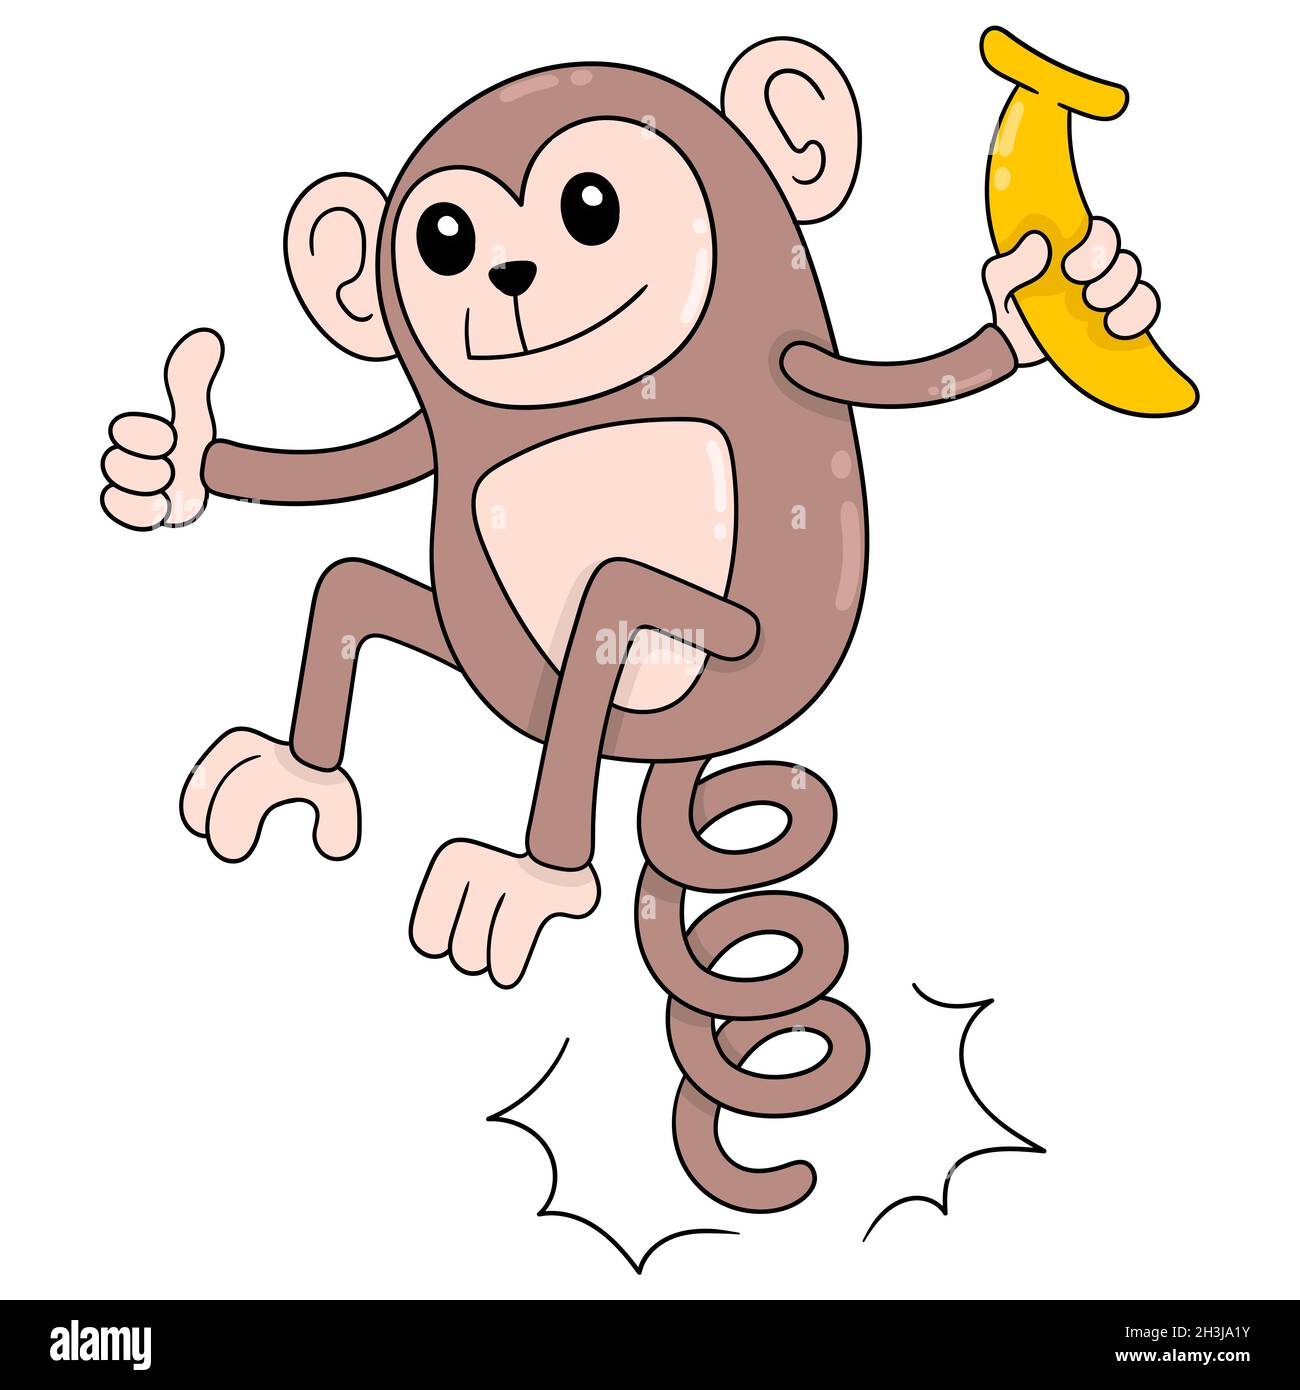 Monkeys jumping Cut Out Stock Images & Pictures - Alamy